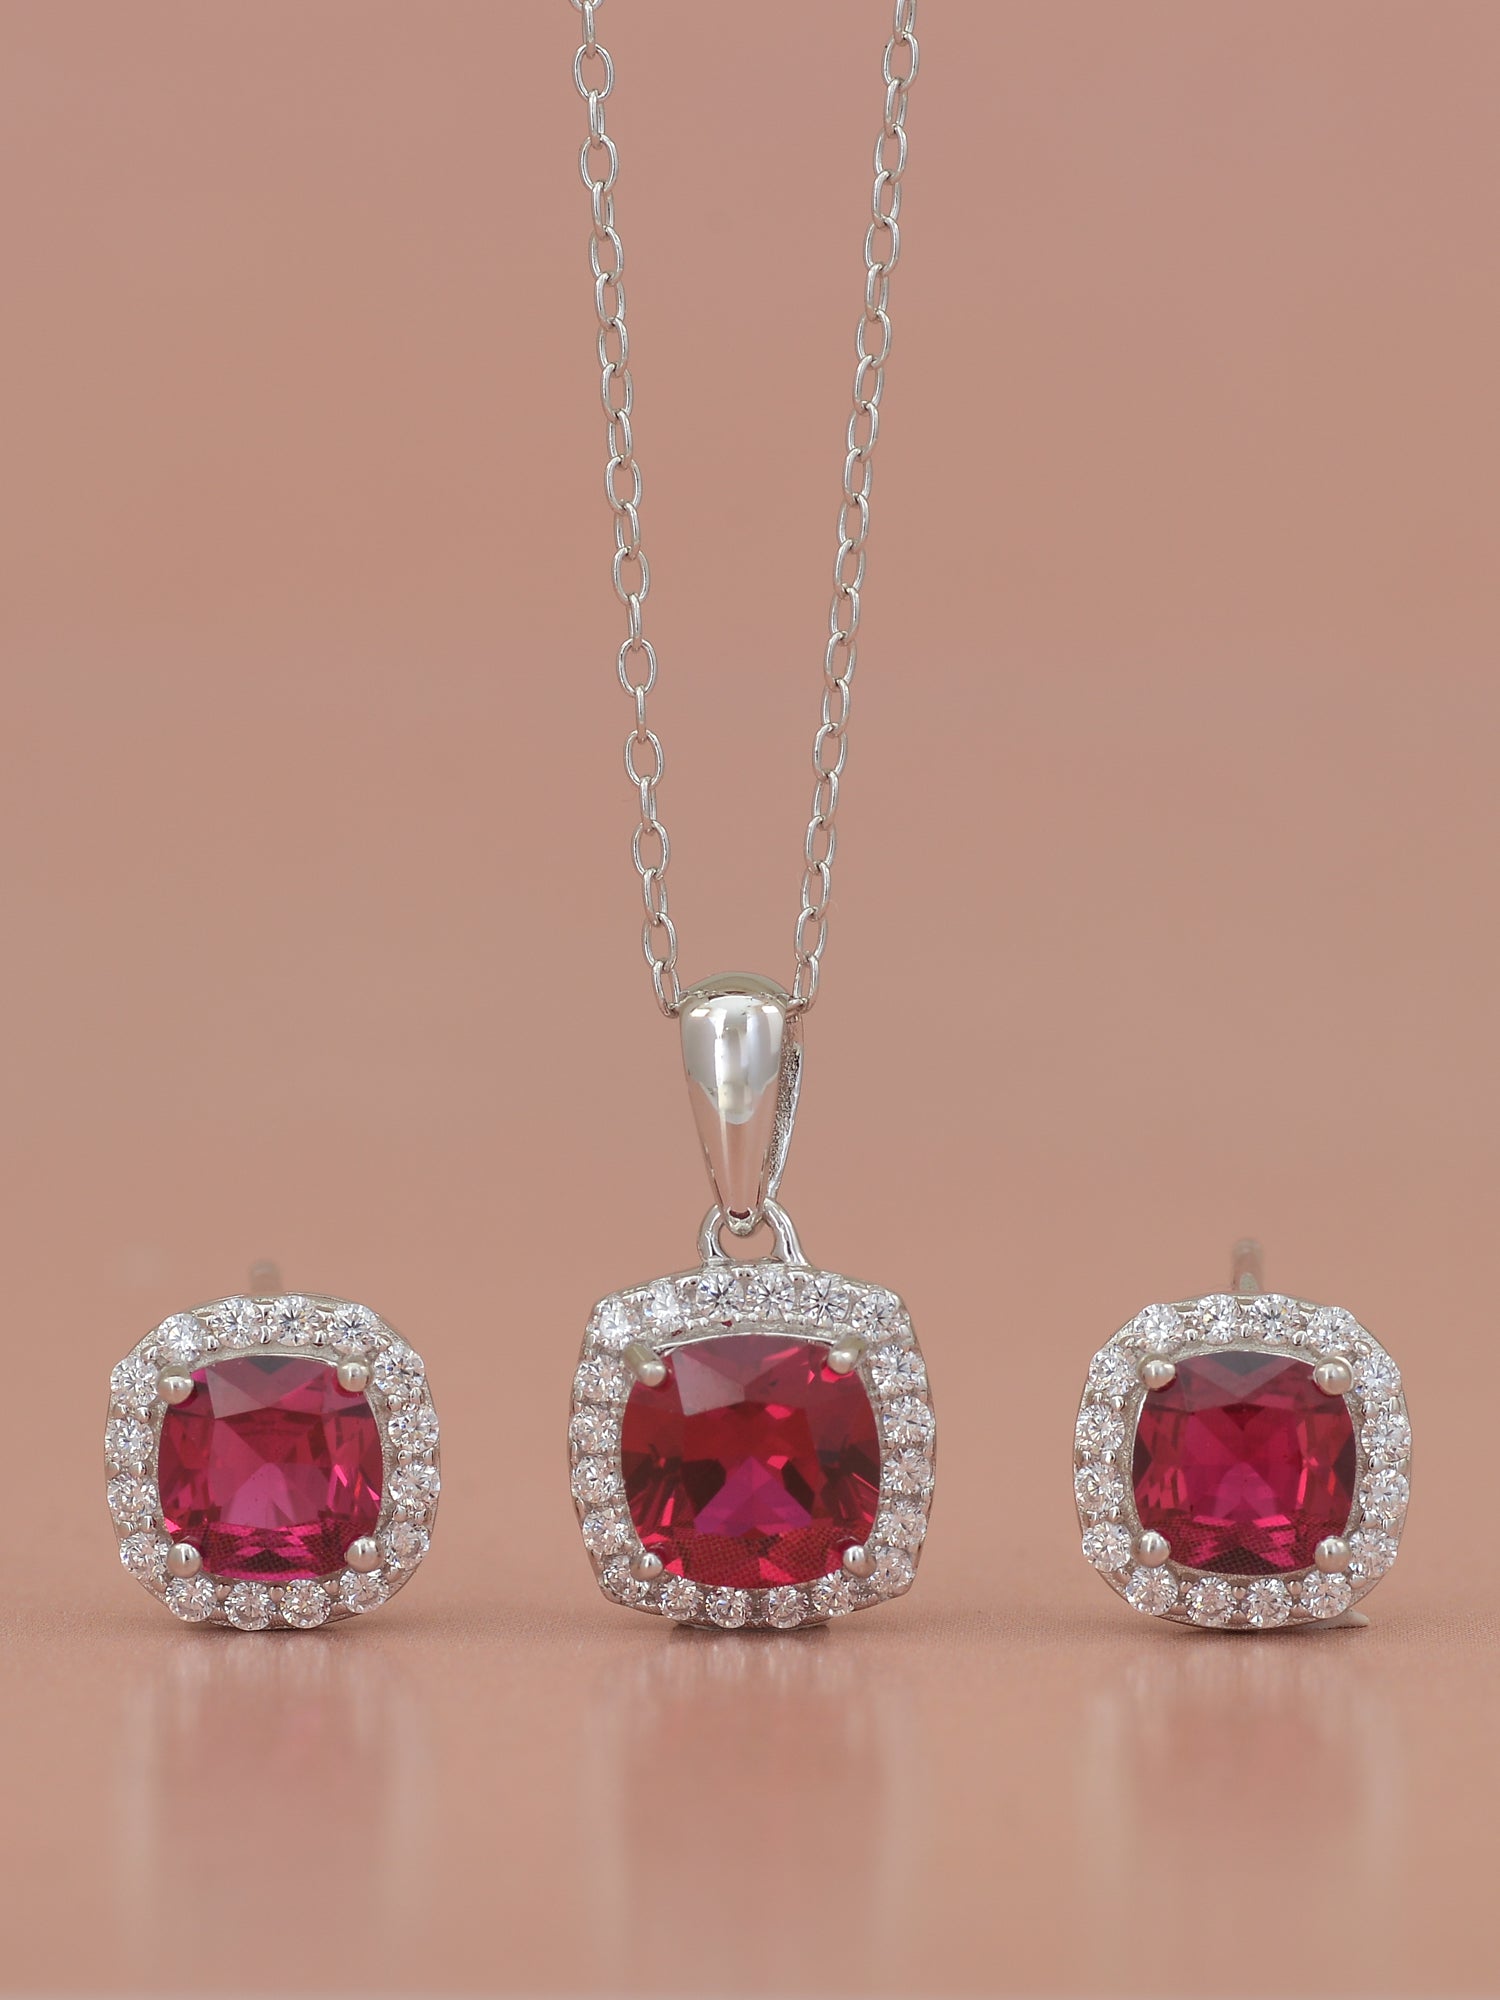 CUSHION CUT RUBY PENDANT WITH EARRINGS IN 925 SILVER-2